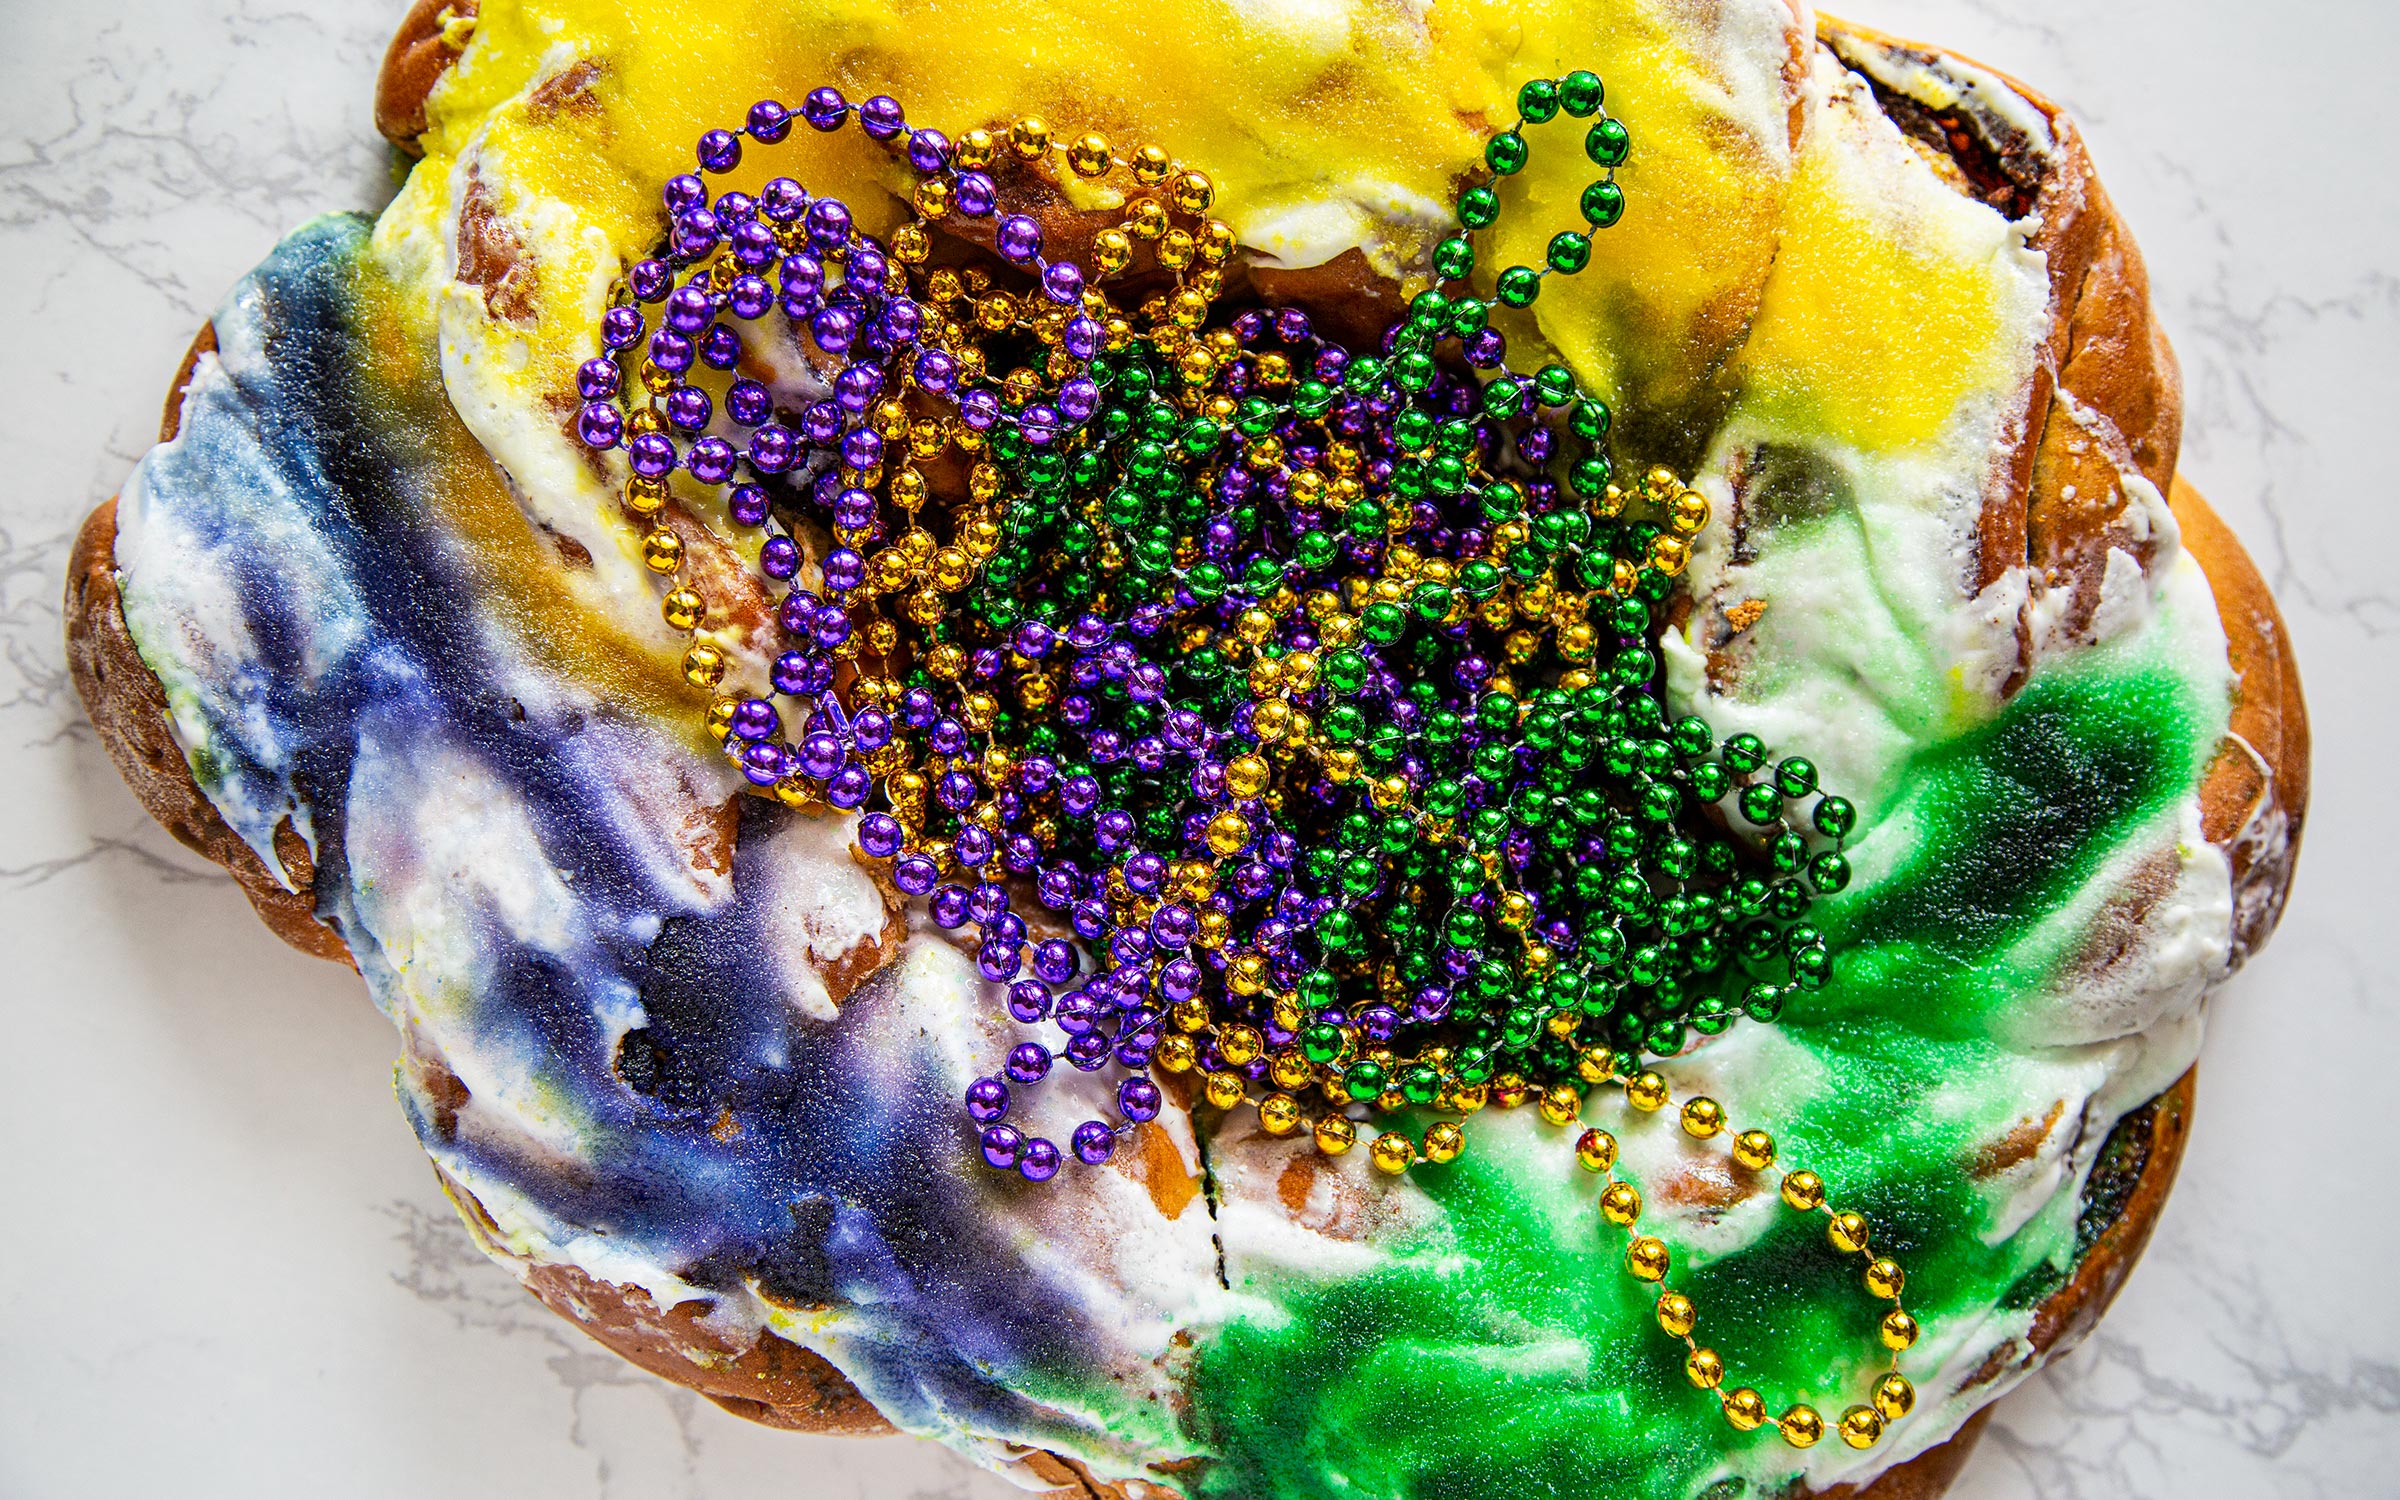 England Oaks Active Adult Community - History of the King Cake-The King Cake  is believed to have originated around the 12th century. The early Europeans  celebrated the coming of the three wise